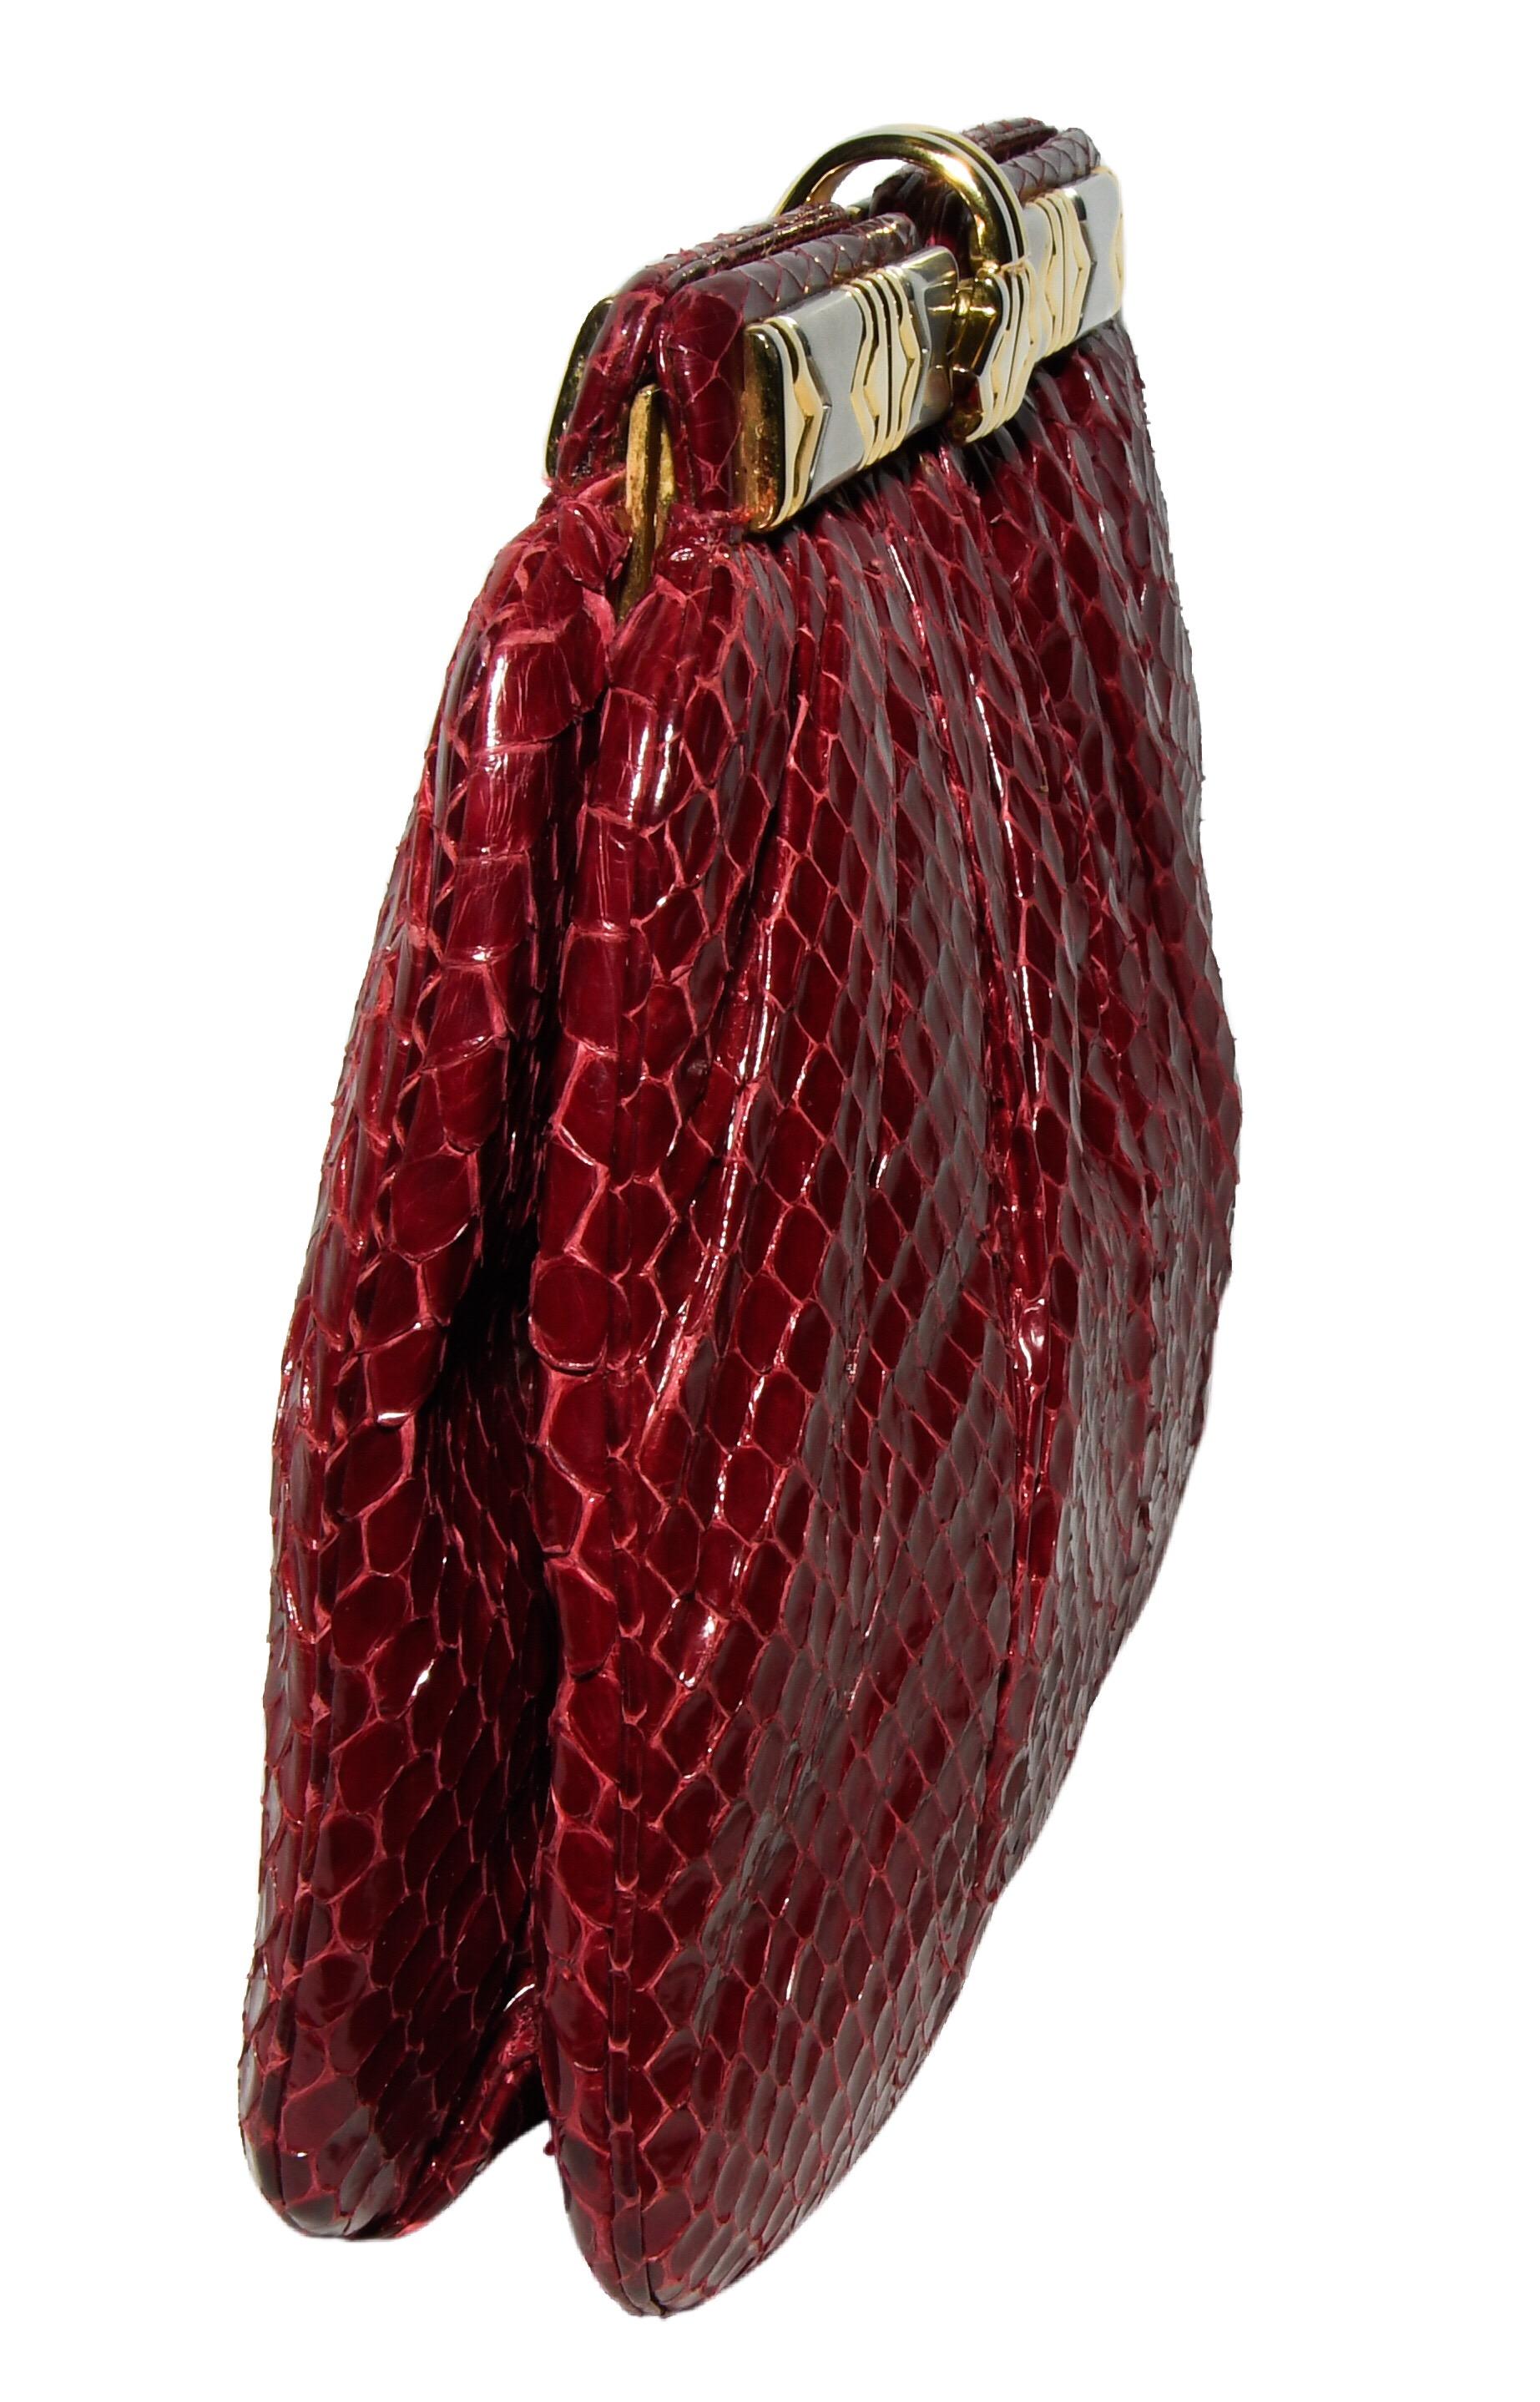 Judith Leiber burgundy python leather clutch includes a python leather shoulder strap.  This clutch contains a center compartment that is lined in red grosgrain with 2 side slit pockets.  The outside is gathered  on both sides.  The top handle metal